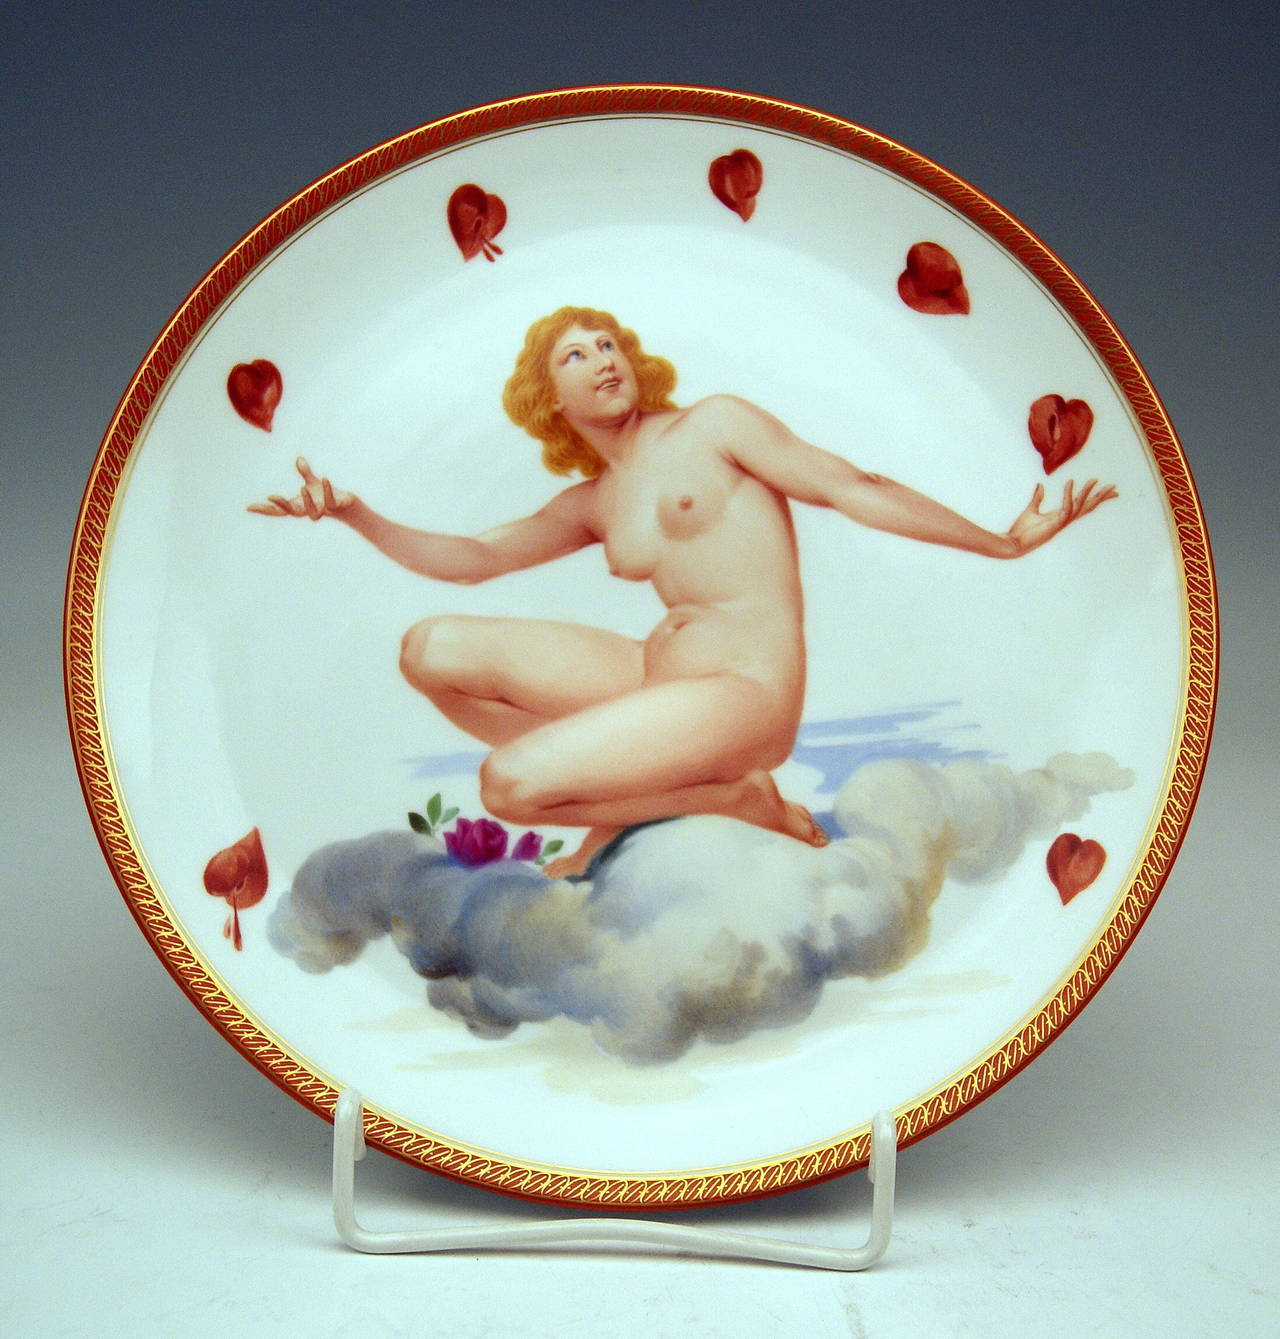 MEISSEN GORGEOUS PICTURE PLATE OF FEMALE NUDE ART NOUVEAU PERIOD 

Manufactory: Meissen
Hallmarked:  Blue Meissen Sword Mark with Pommels on Hilts  (underglazed)
MODEL NUMBER  N  117   /   FORMER'S NUMBER  62
FIRST QUALITY  
Dating:    made